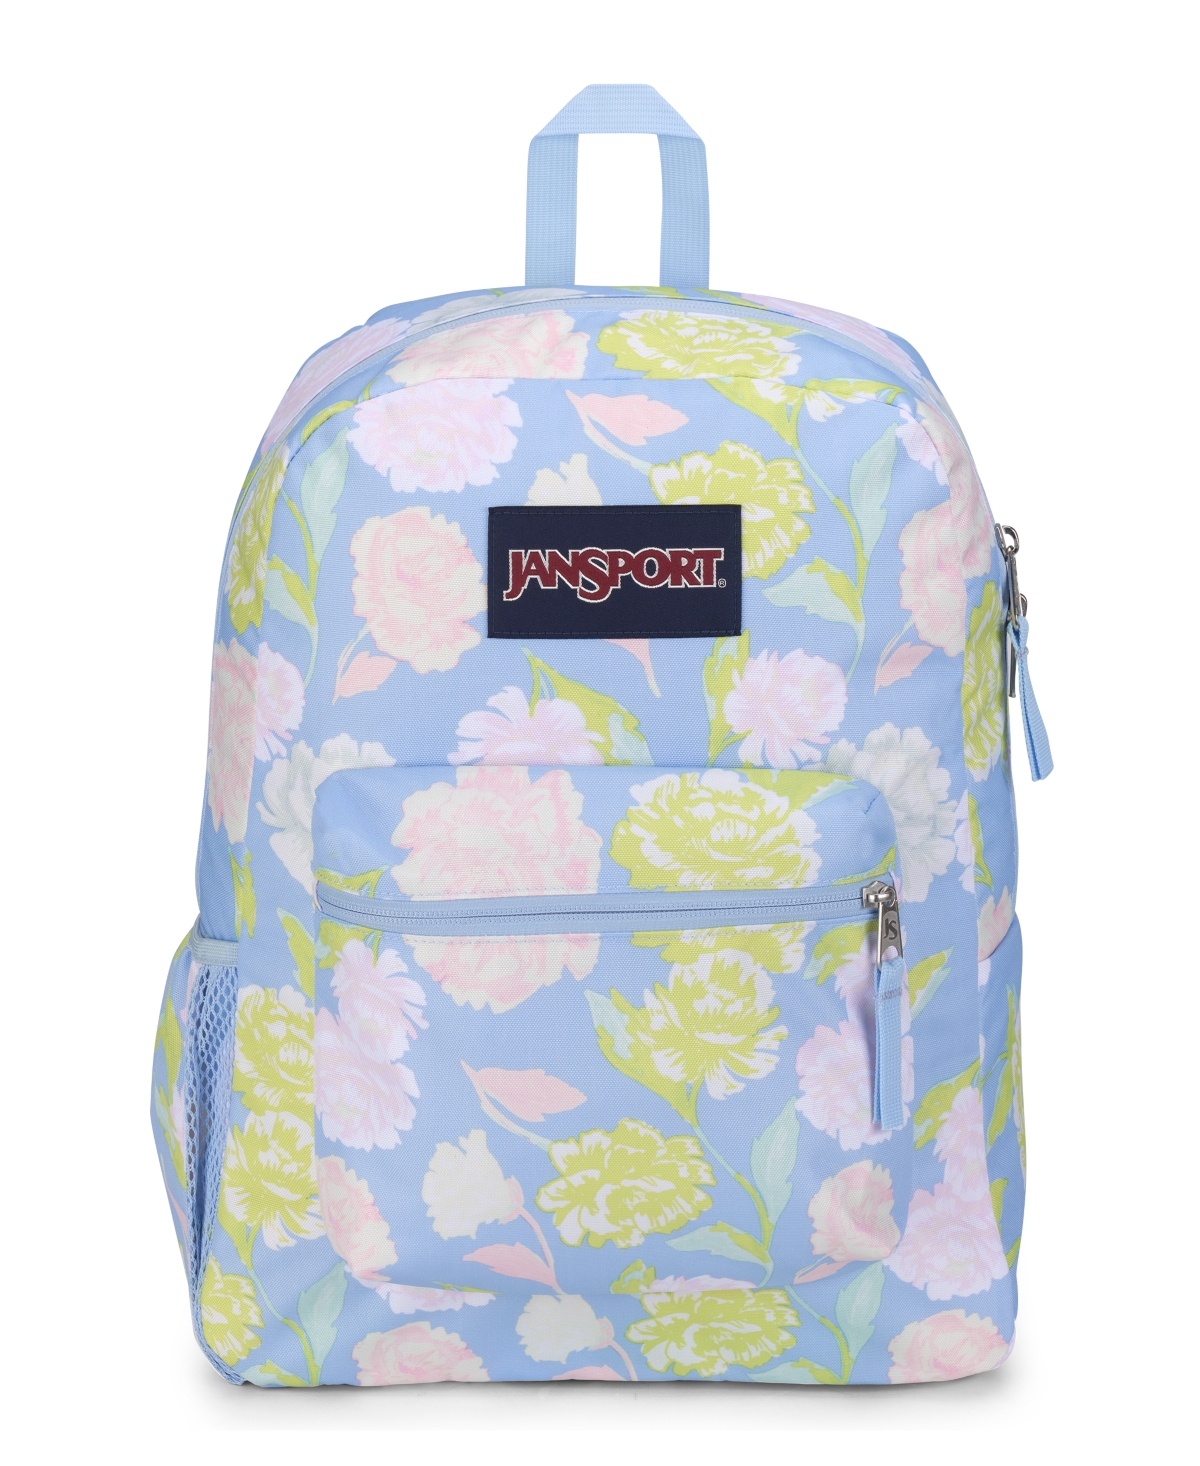 Jansport Cross Town Backpack In Autum Tapestry Hydrangea